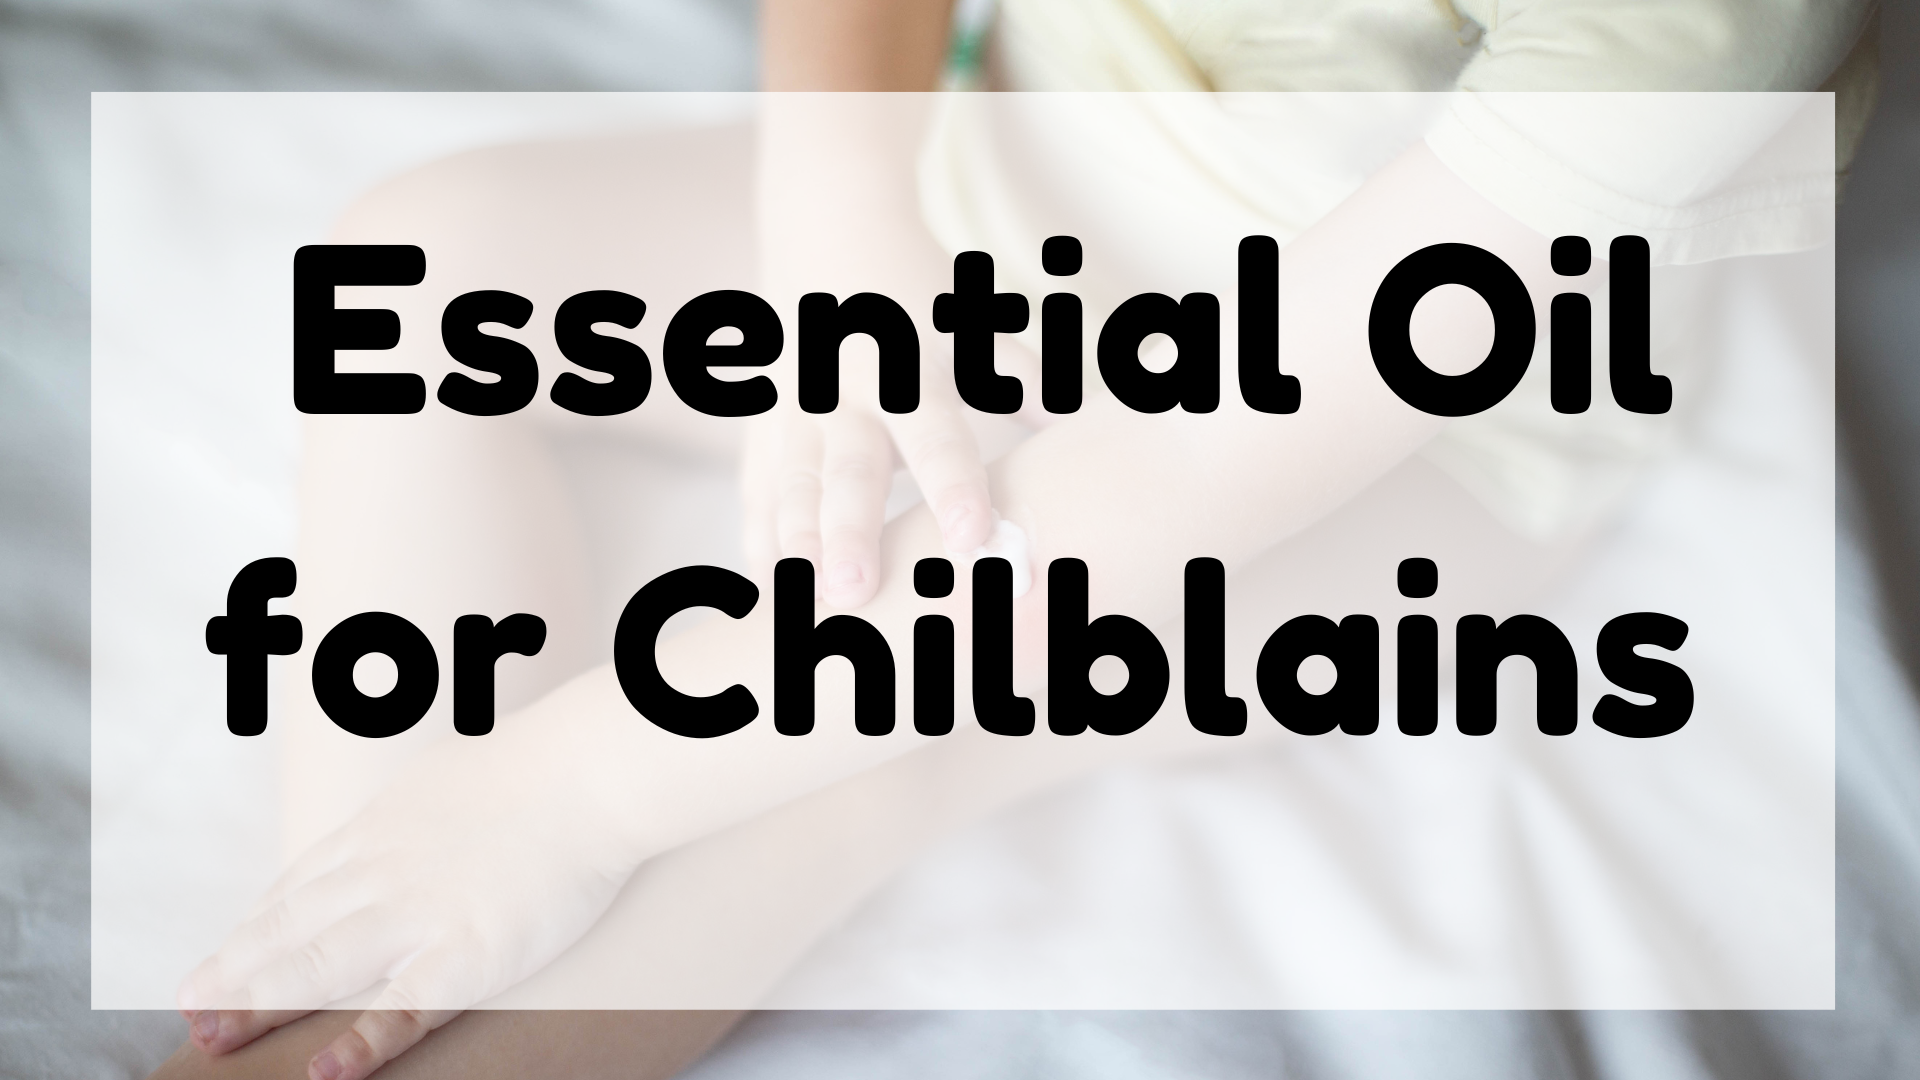 Essential Oil for Chilblains featured image